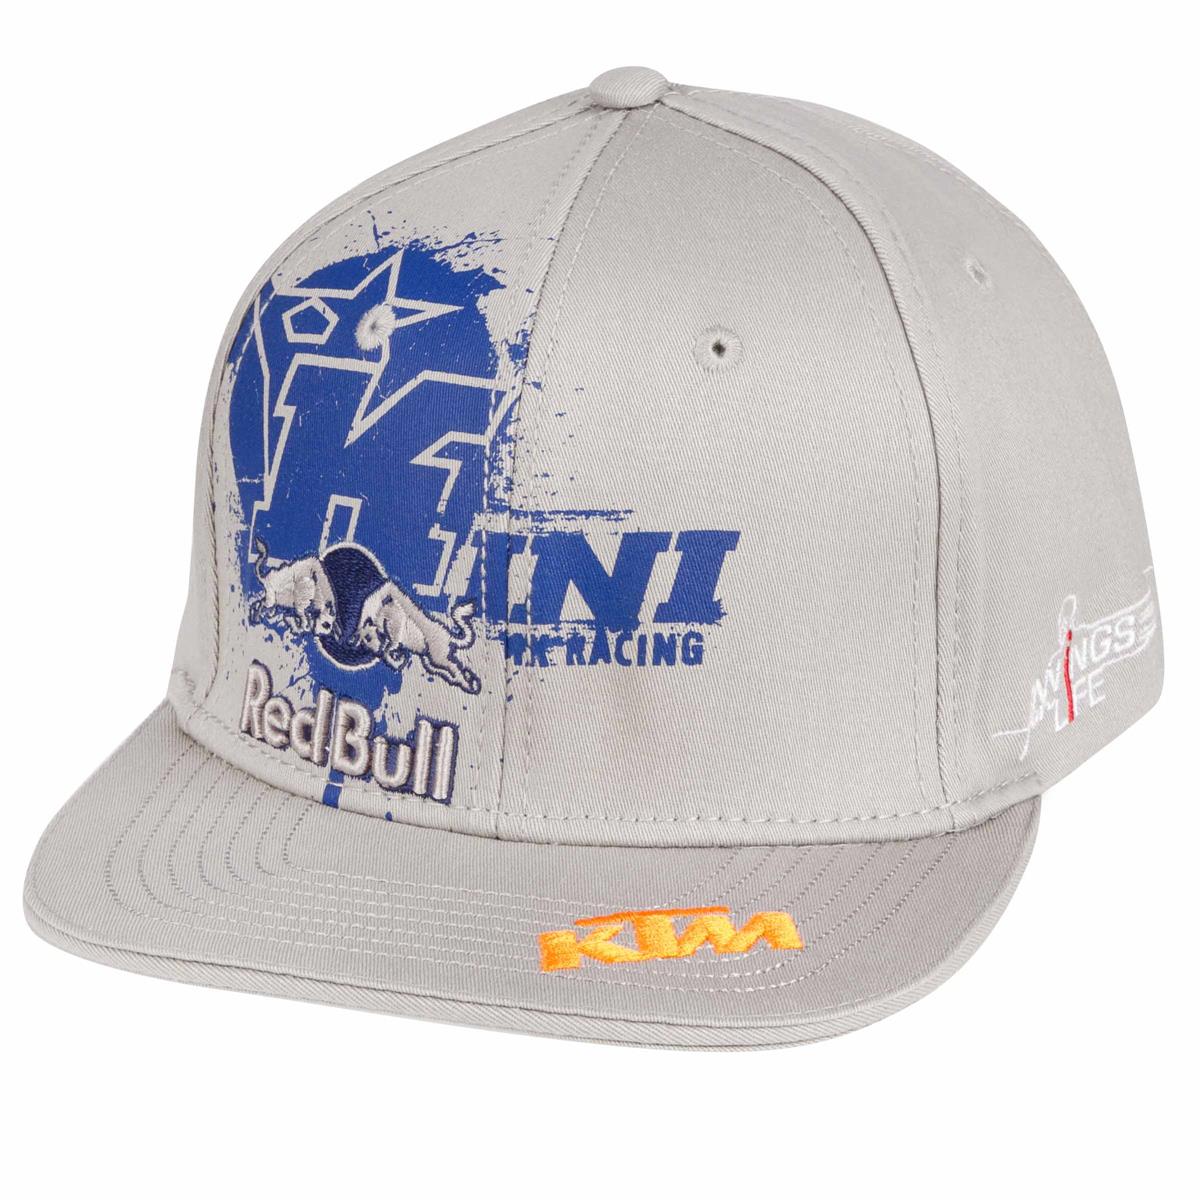 Kini Red Bull Casquette Overspray Gris/Navy